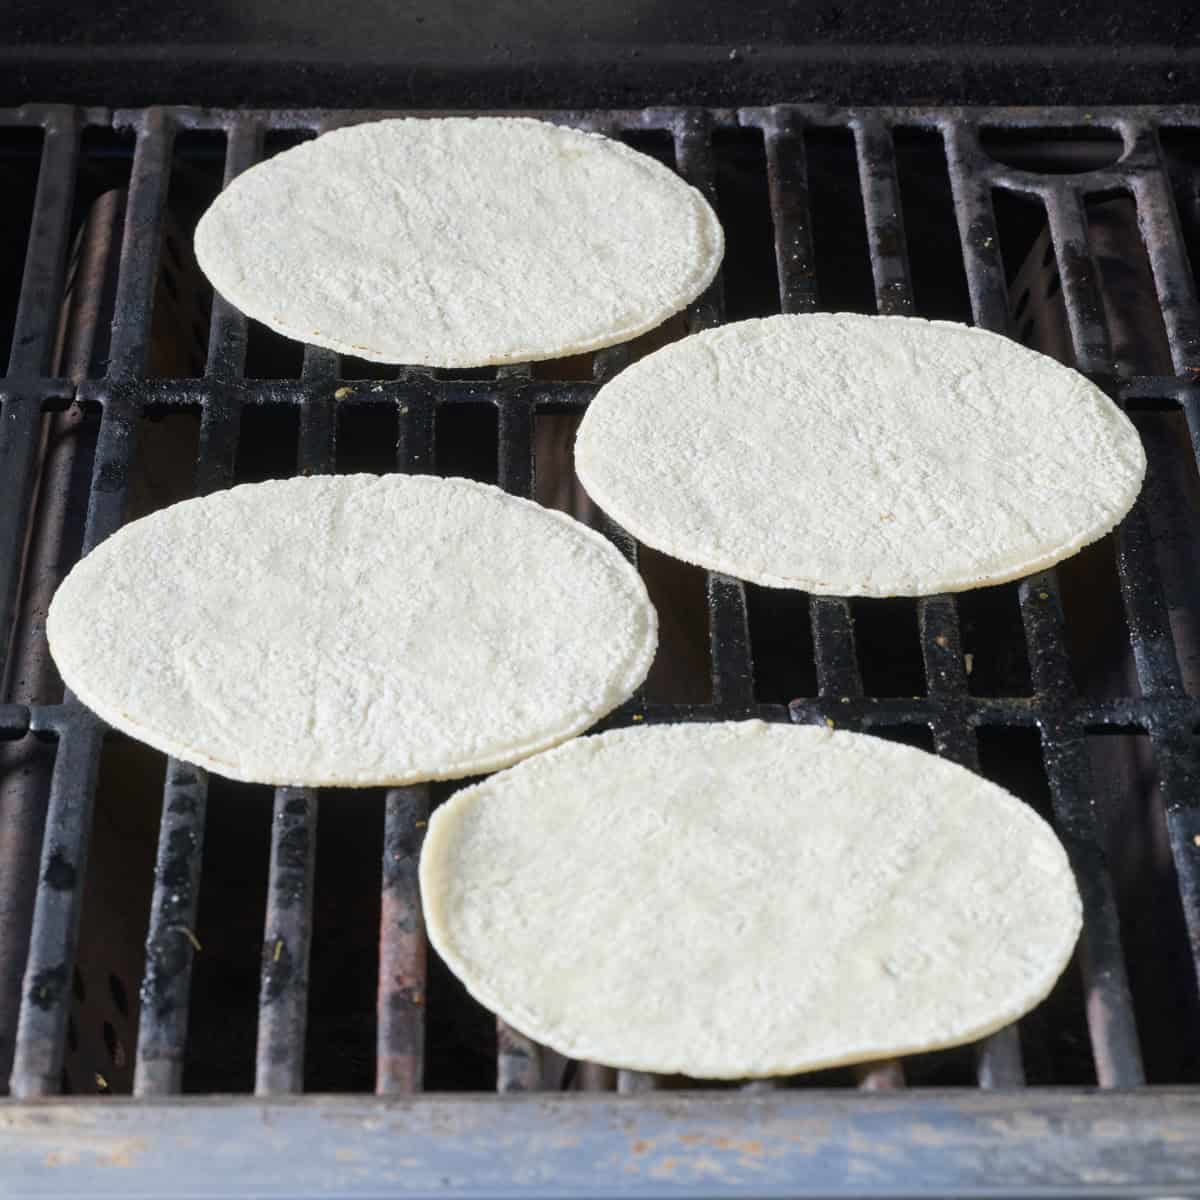 Four tortillas on a gas grill.